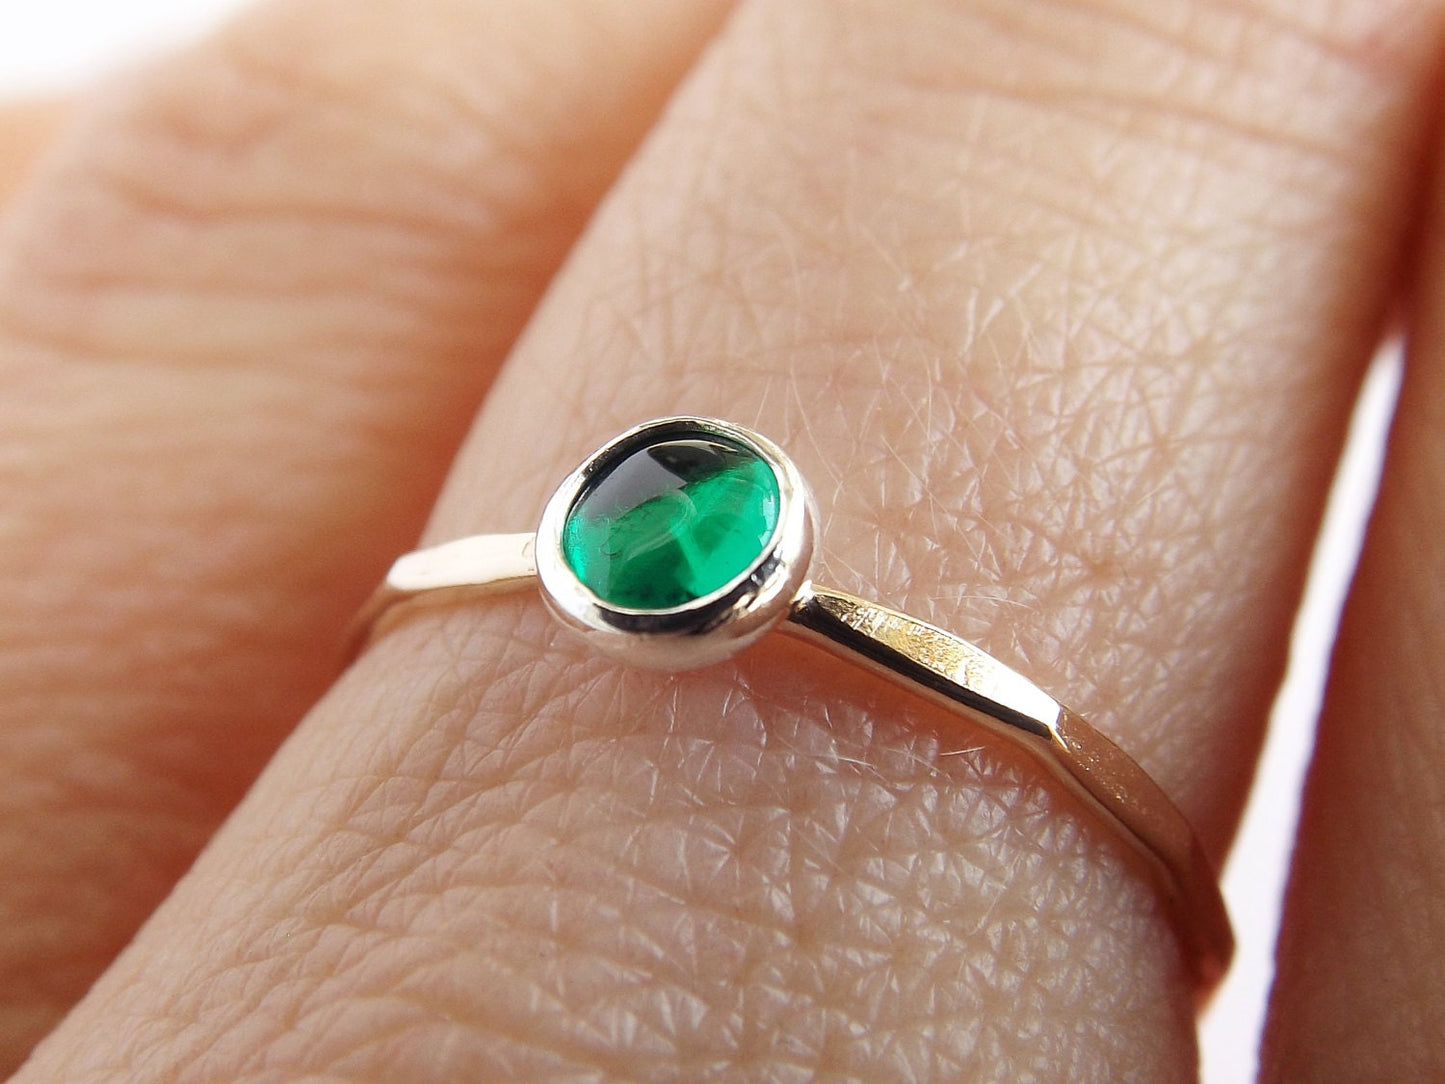 Emerald Ring,Gemstone Ring,Engagement Ring,Romantic Ring,Green and Gold,Emerals,Mixed Metal Stacking Ring,Gold Gemstone Ring,Unique